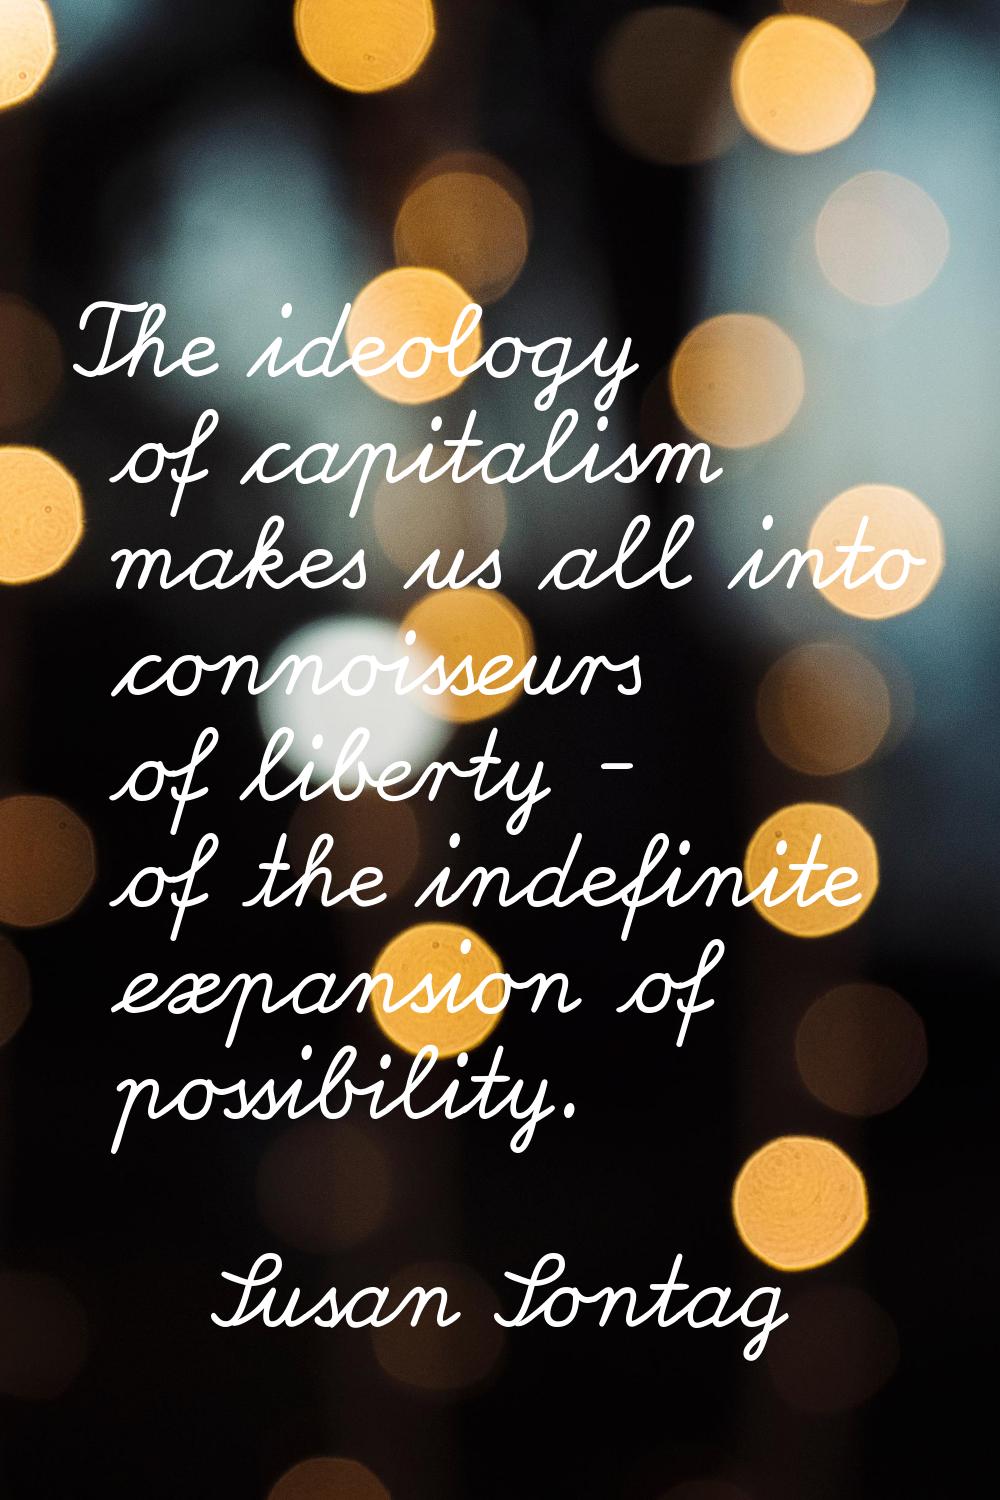 The ideology of capitalism makes us all into connoisseurs of liberty - of the indefinite expansion 